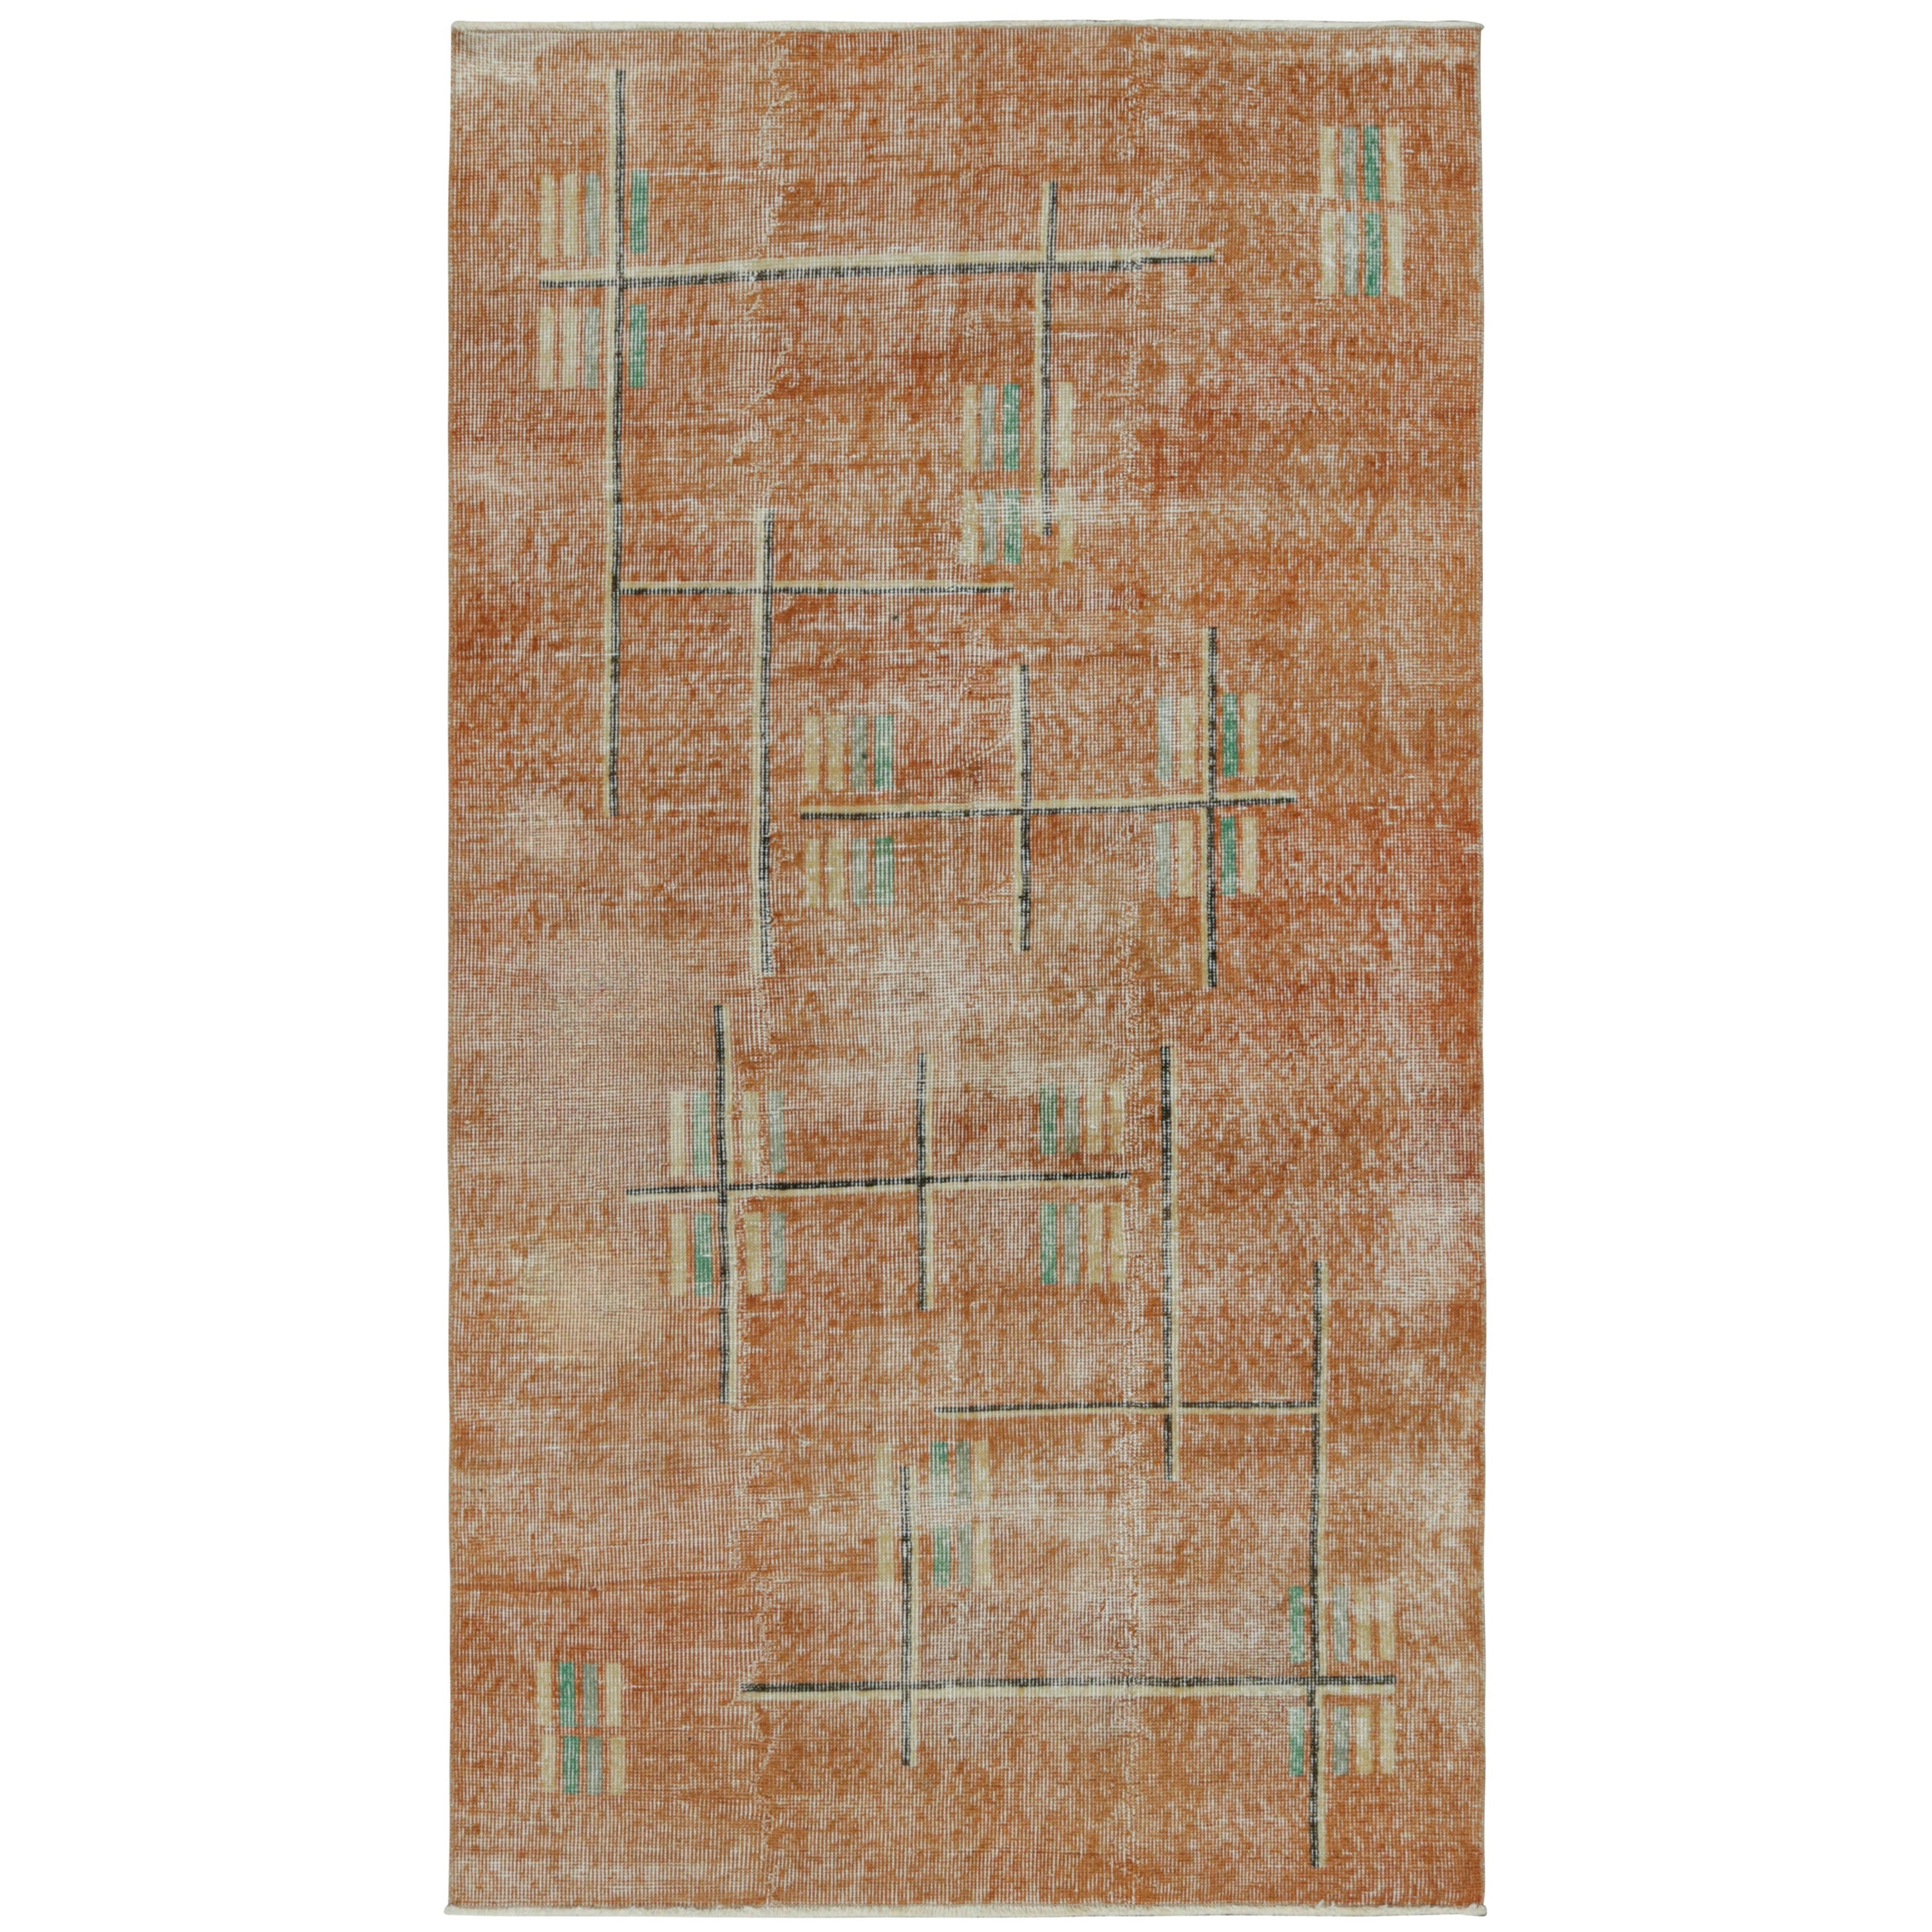 Vintage Zeki Müren Rug in Rust with Polychromatic patterns, from Rug & Kilim For Sale